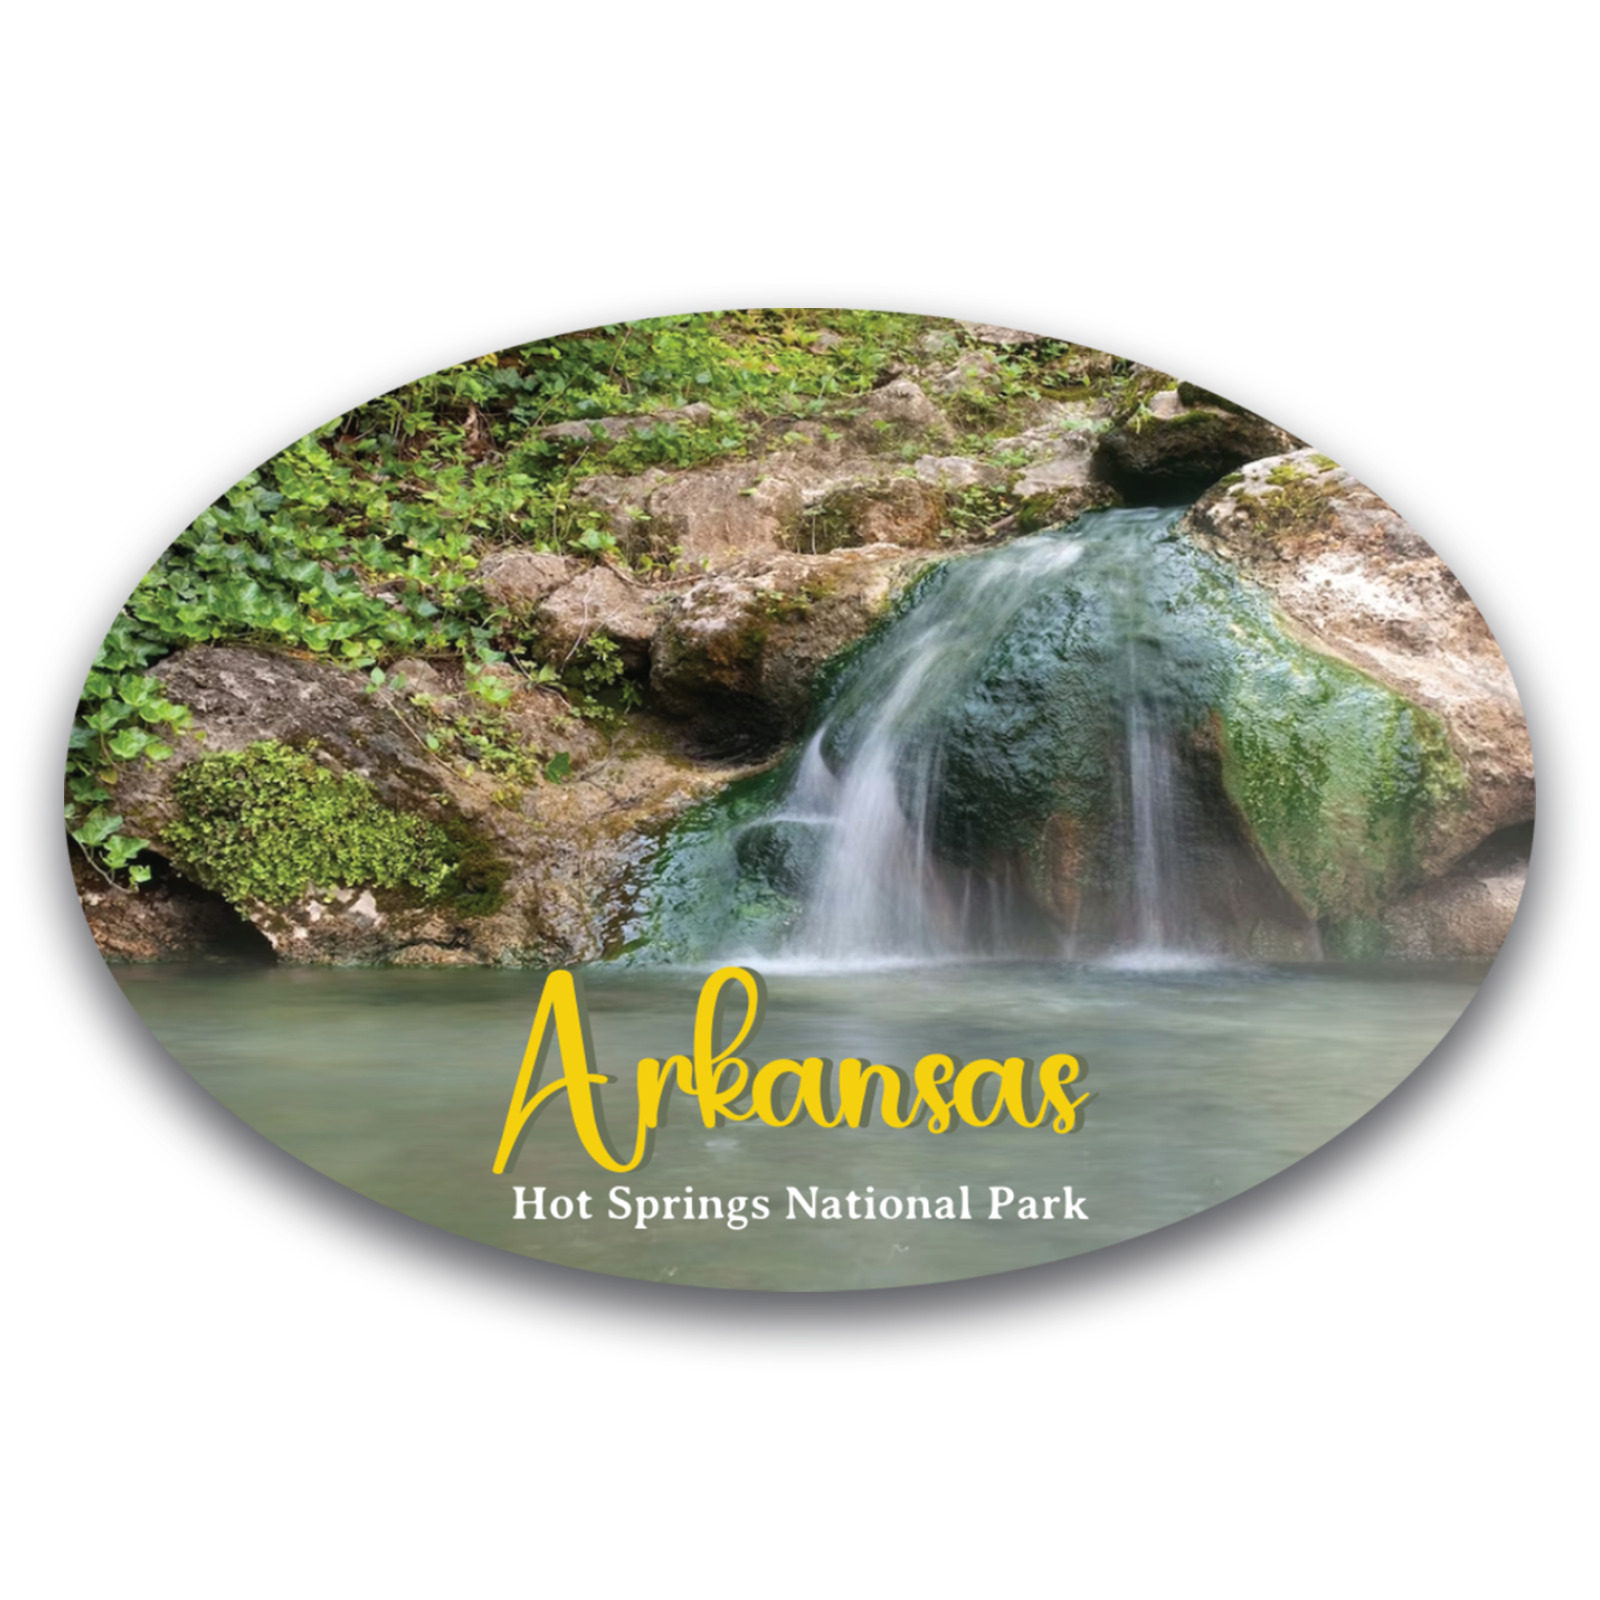 Magnet Me Up Arkansas Hot Springs National Park Scenic Oval Magnet Decal, 4x6 In